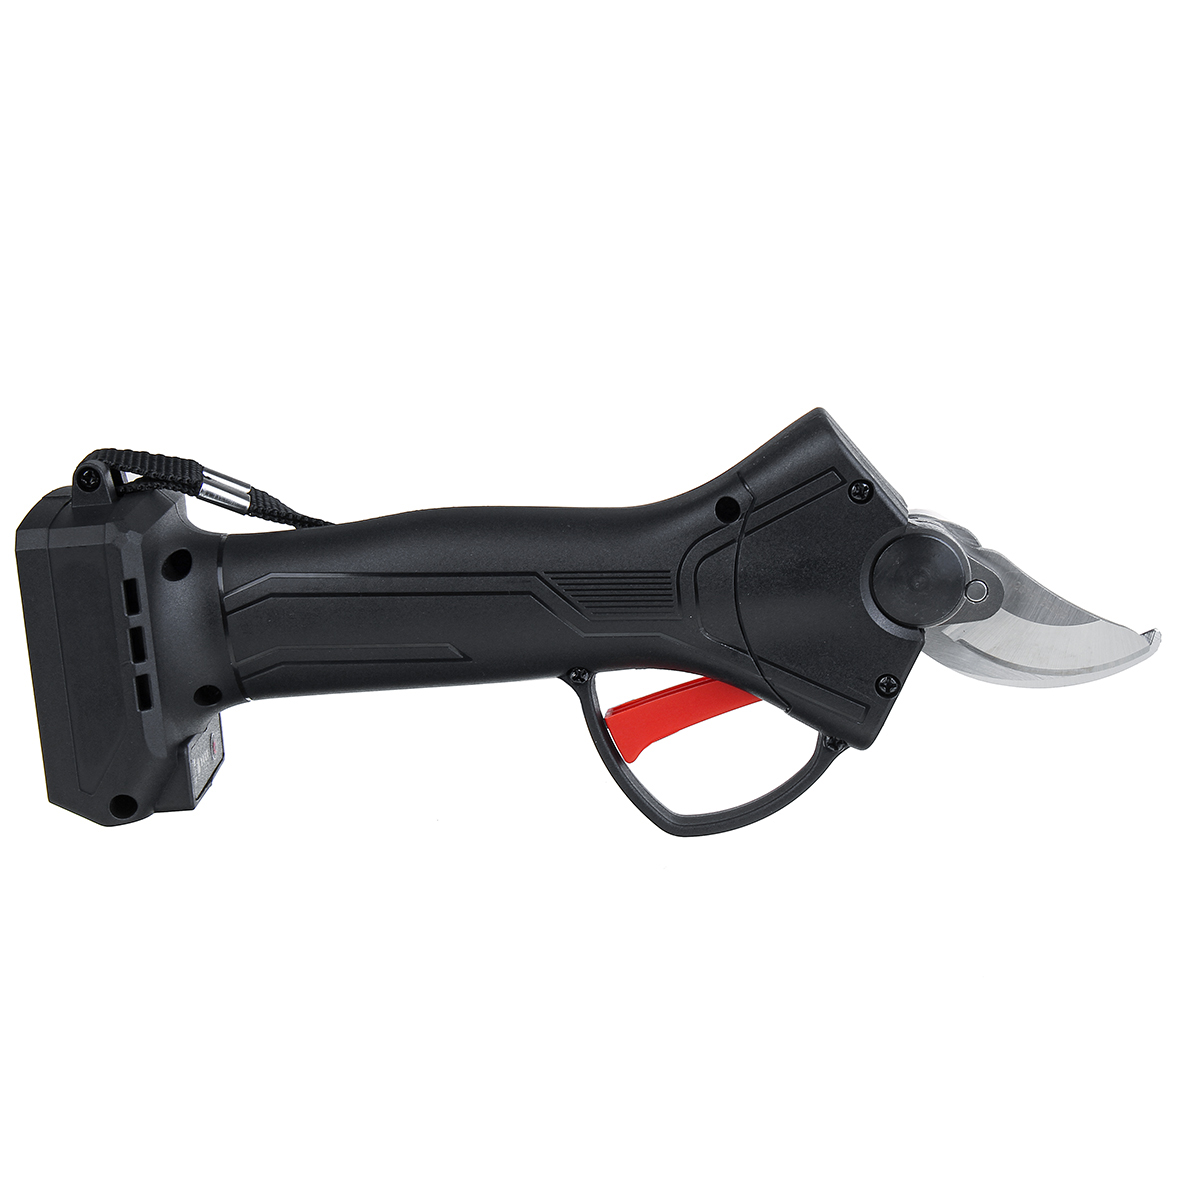 36V-Cordless-Rechargeable-Electric-Pruning-Shears-Secateur-Low-Noise-Branch-Cutter-Scissor-Trimmer-W-1660335-7